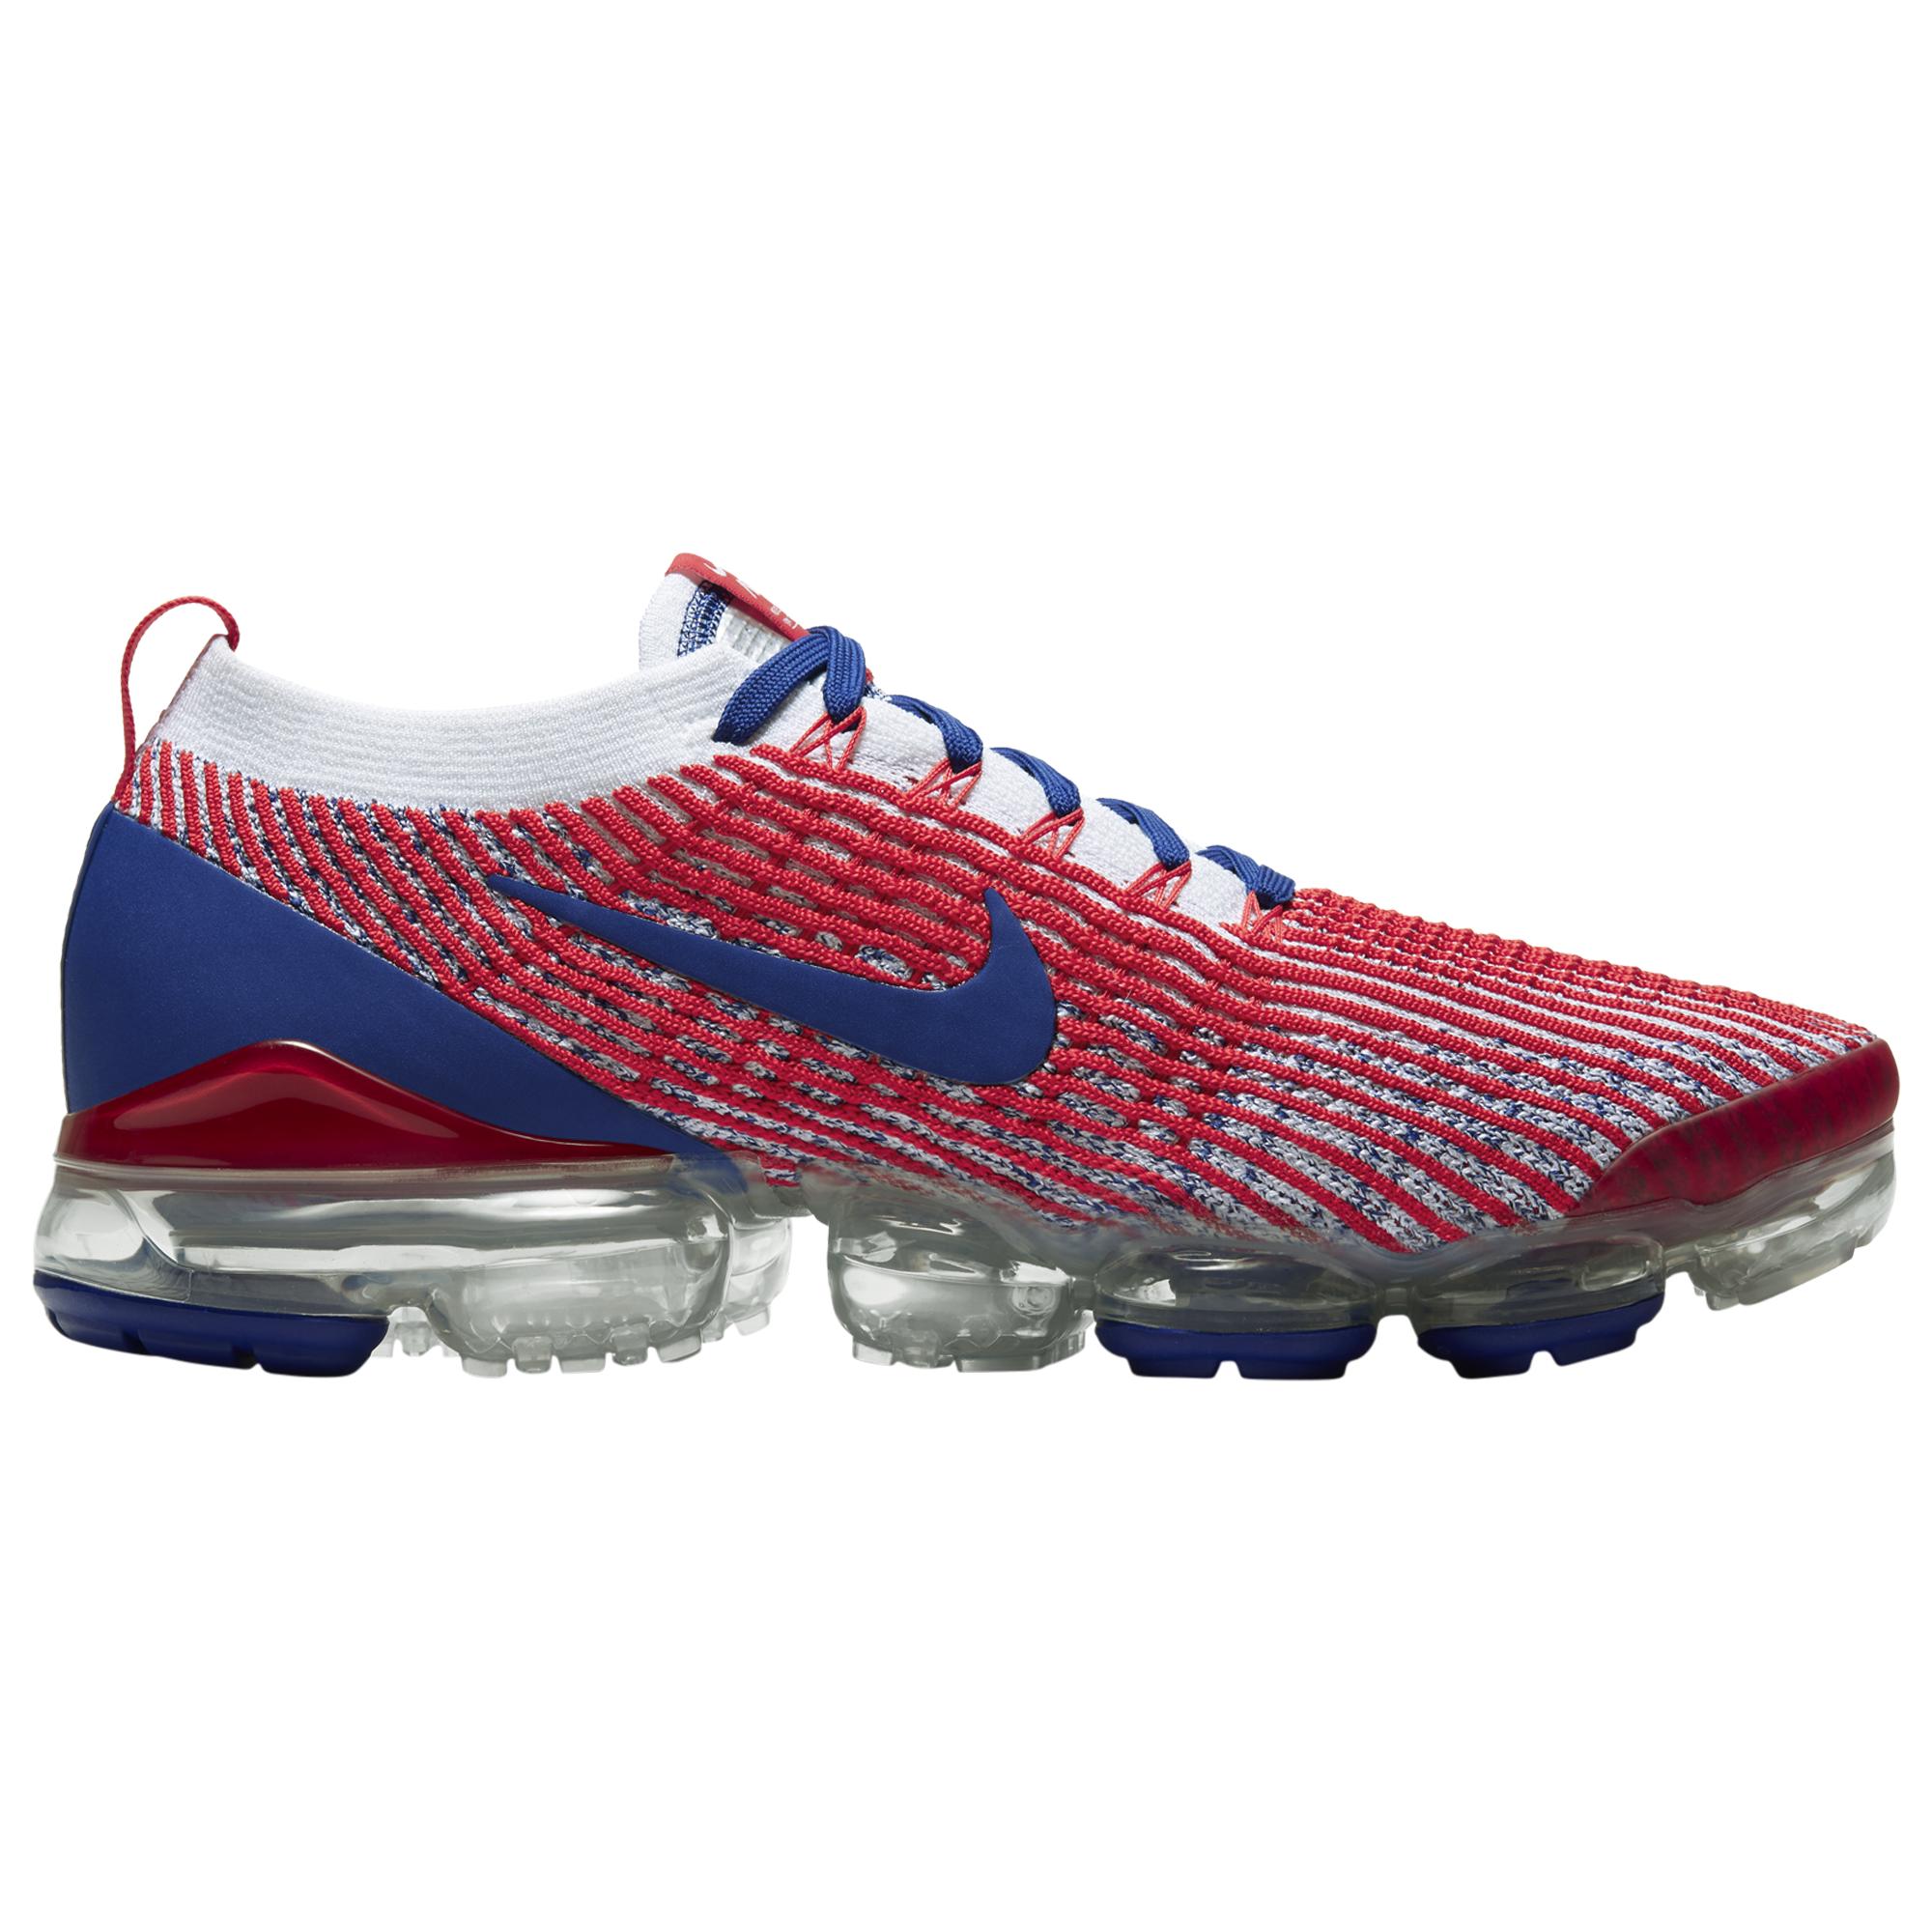 Nike Rubber Air Vapormax Flyknit 3 Running Shoes in Red for Men - Lyst